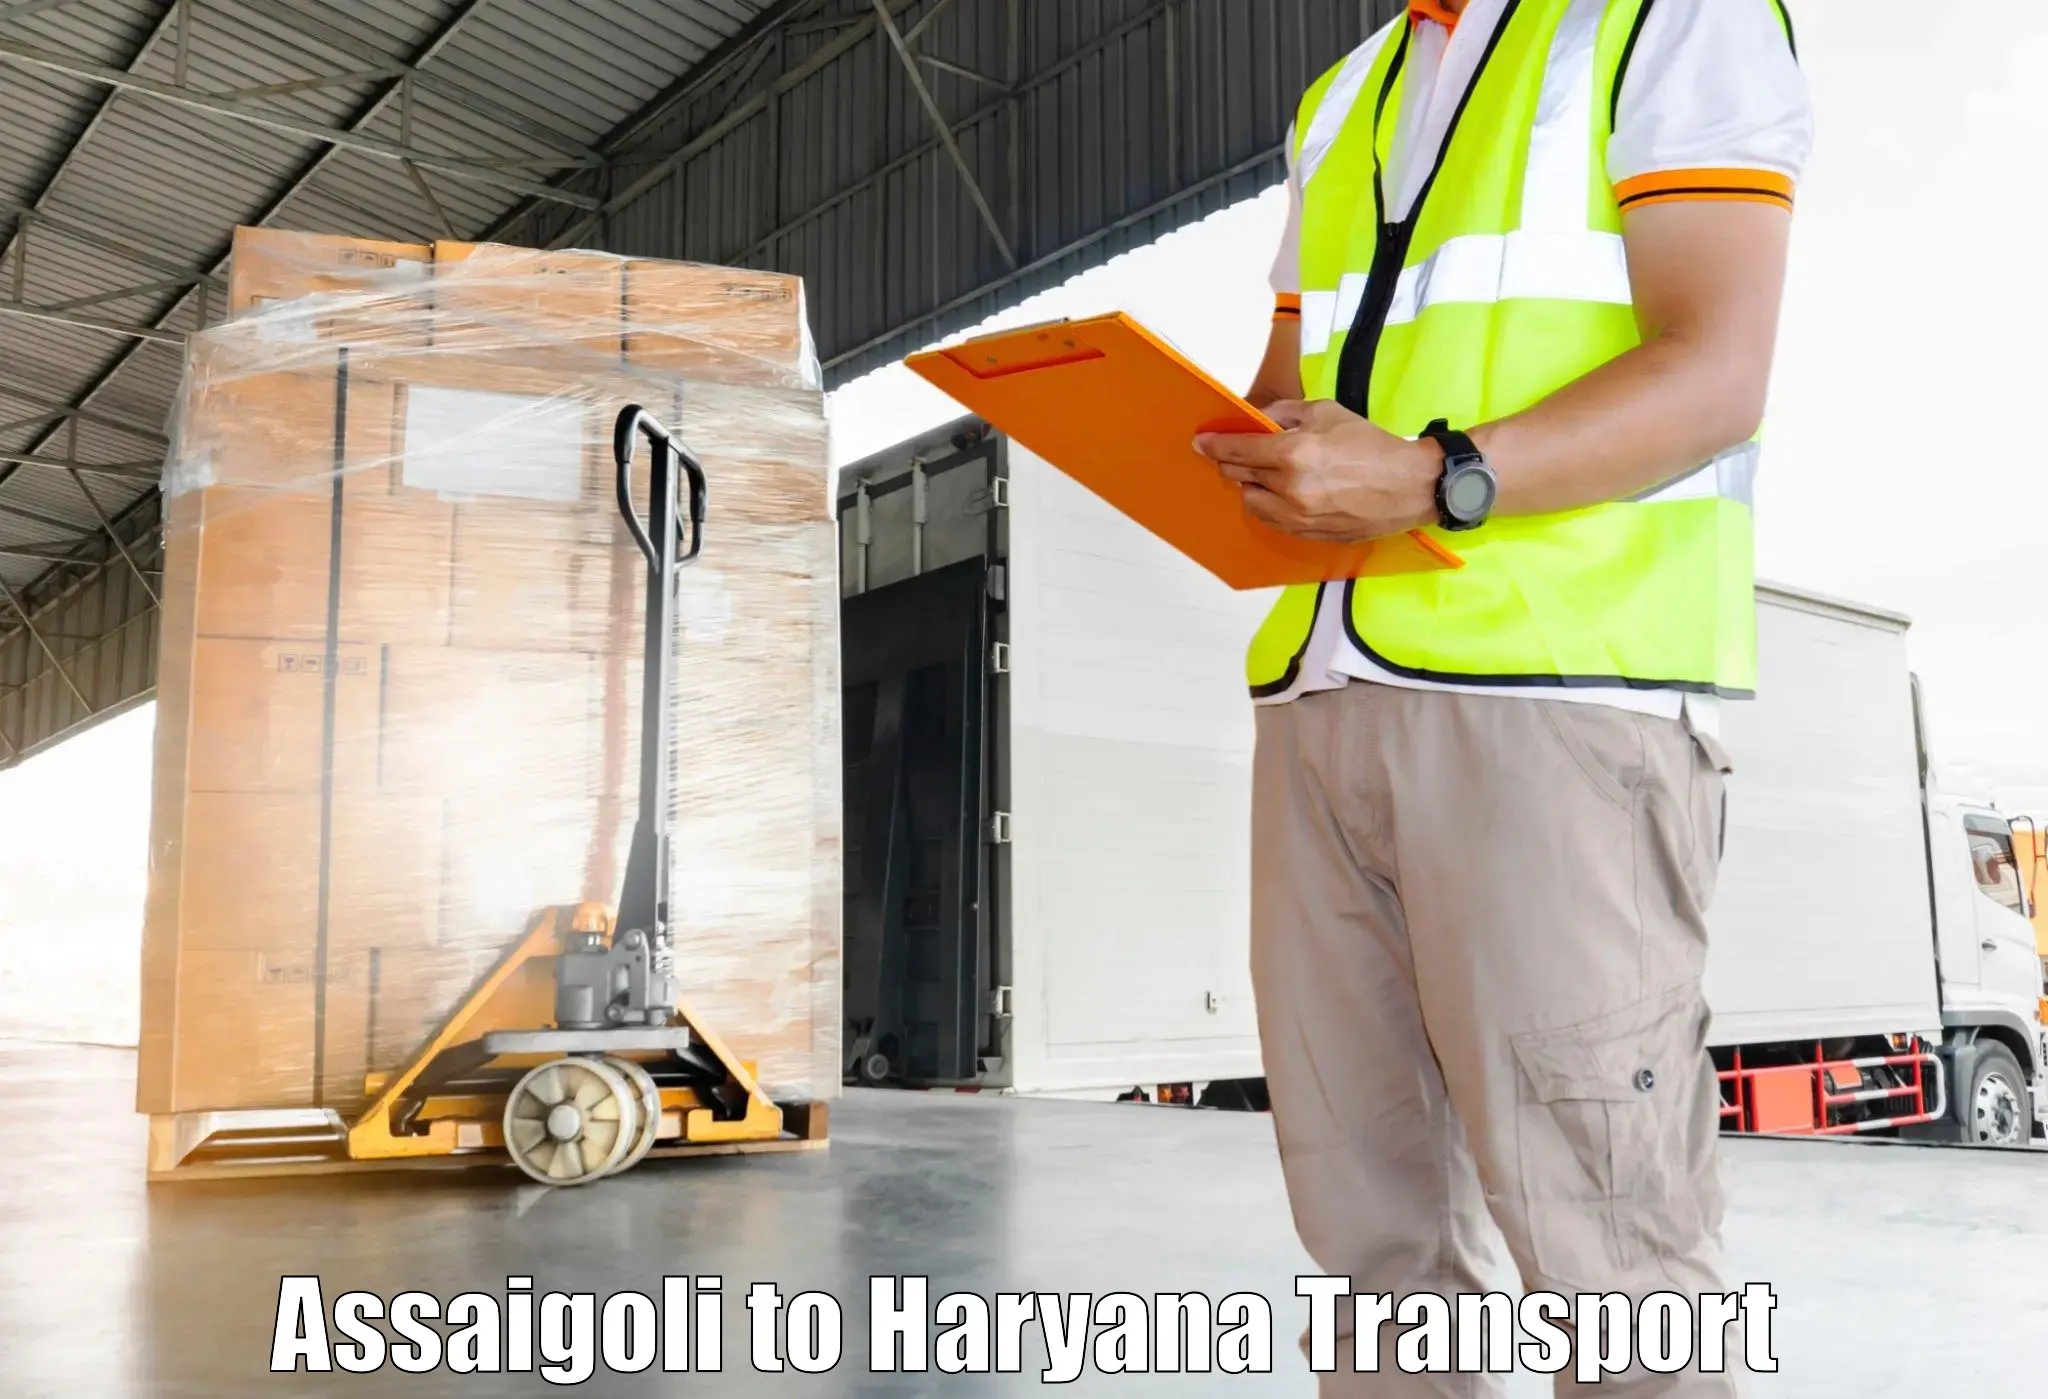 Part load transport service in India Assaigoli to Odhan